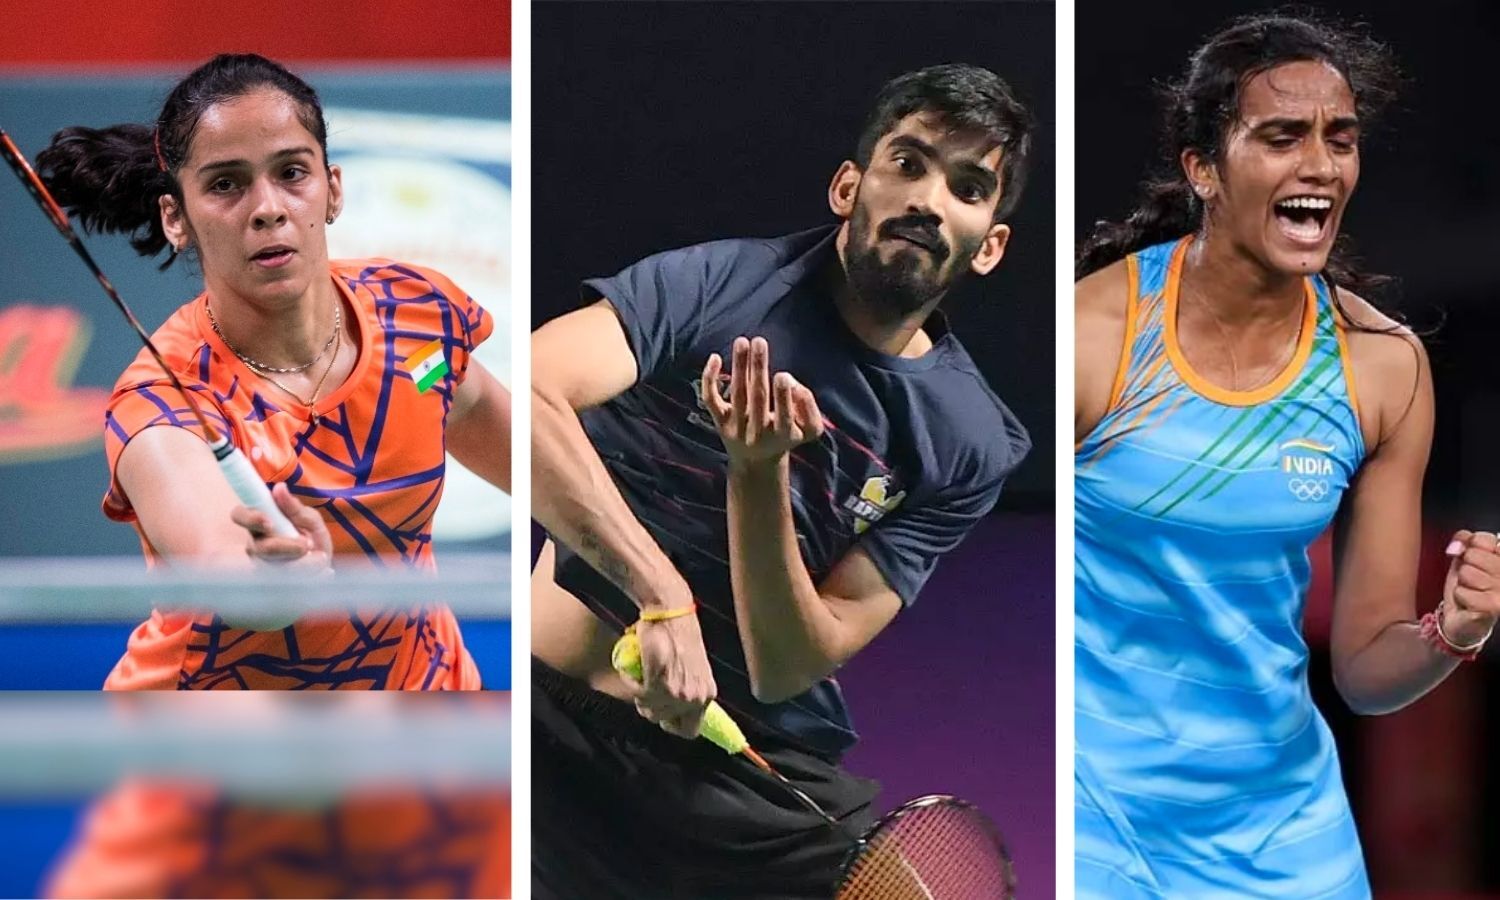 Swiss Open 2022 All you need to know, Indian squad, Schedule and Where to Watch